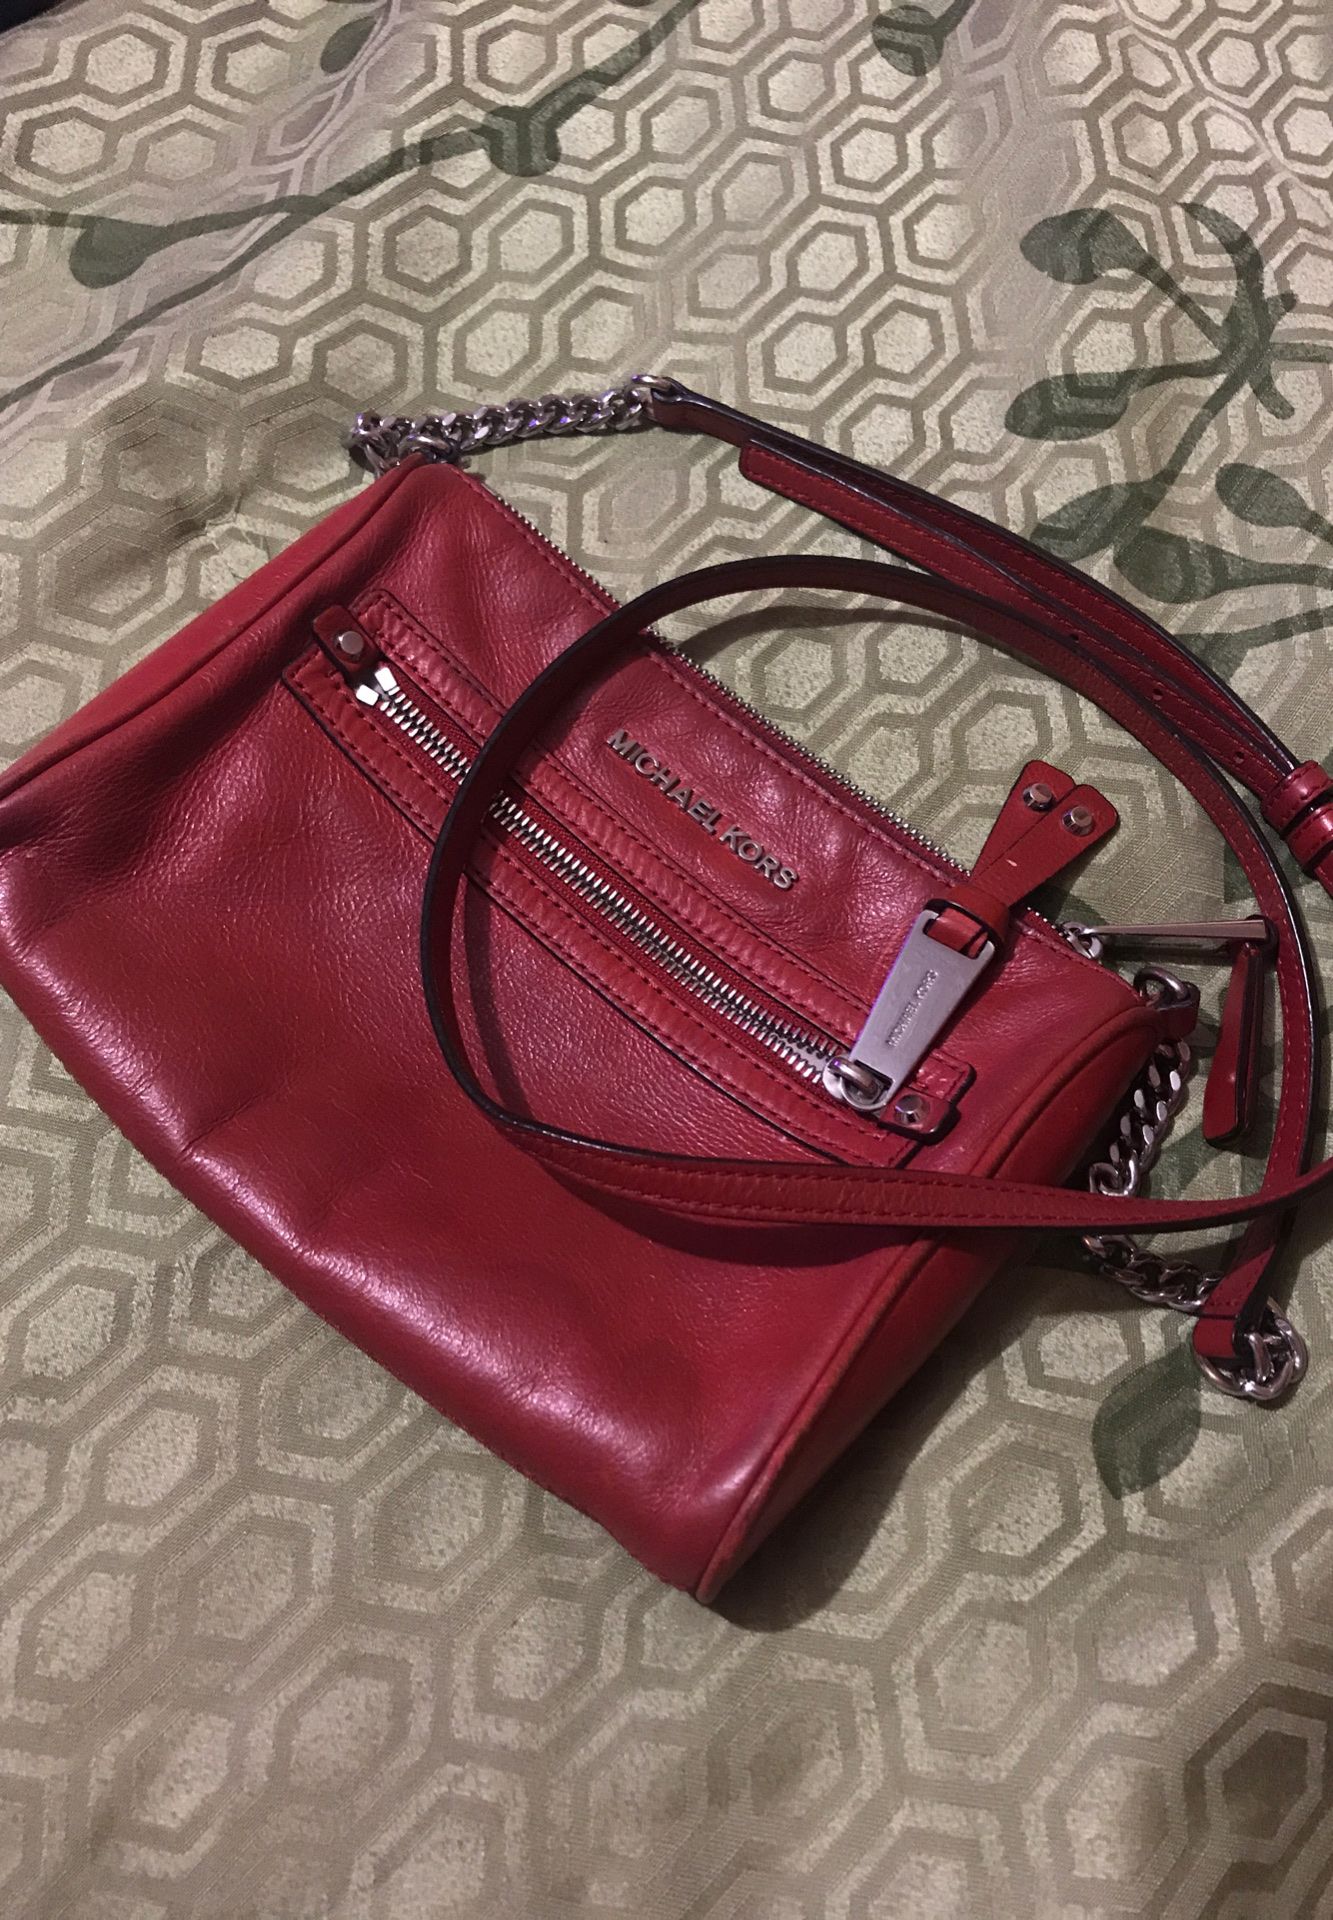 Michael Kors red leather purse